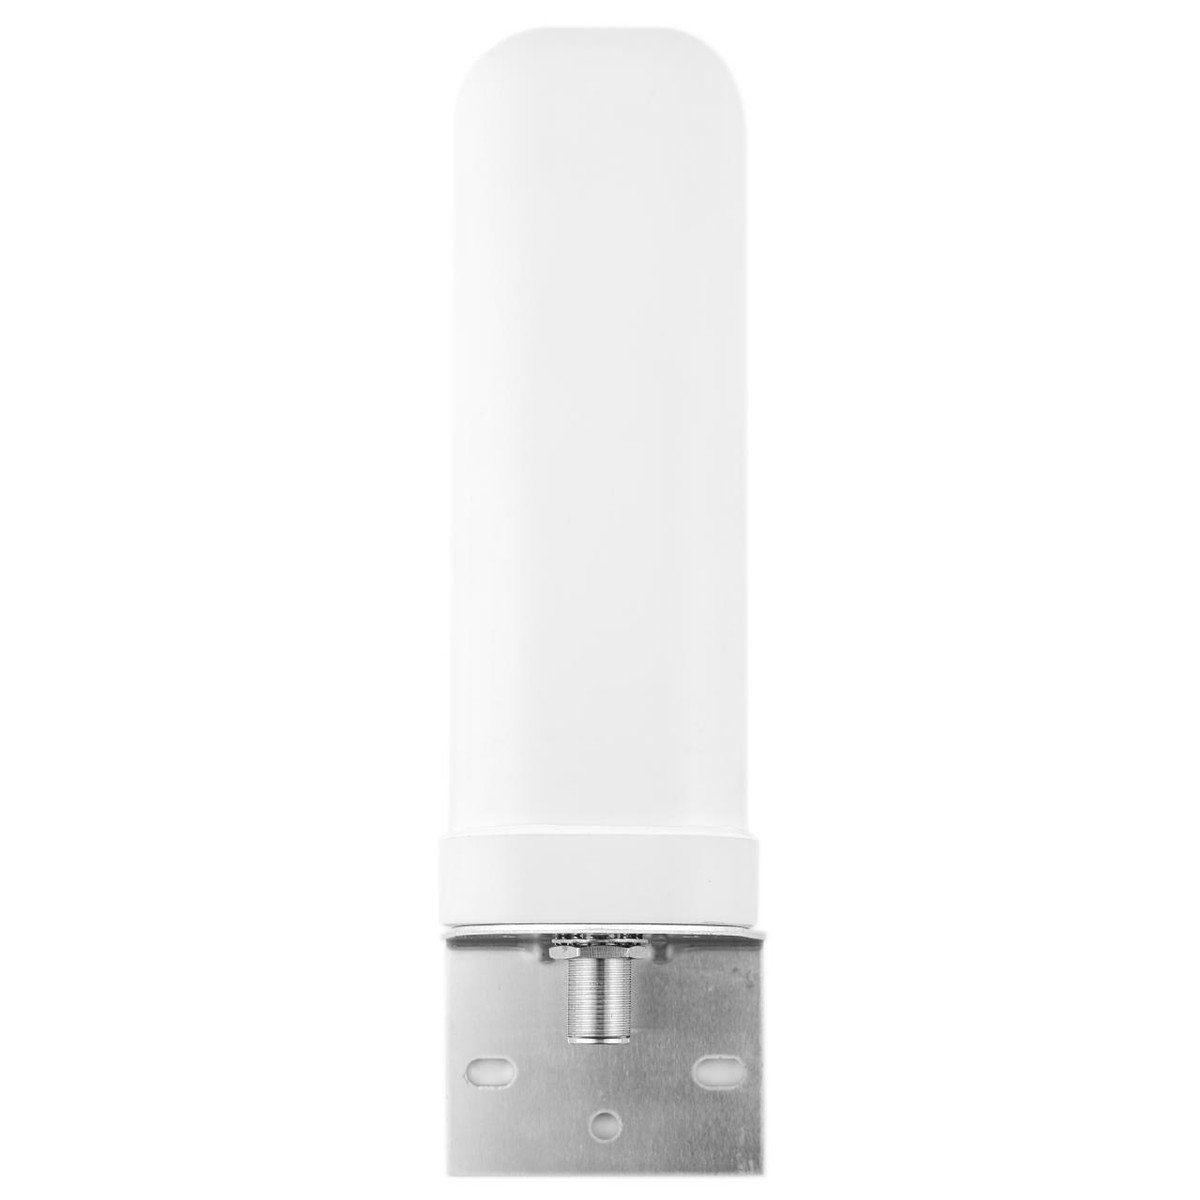 Bolton Tech The All Rounder or Bolton Technical Omni-Directional Cellular Antenna, 698-2700 MHz, N-Female